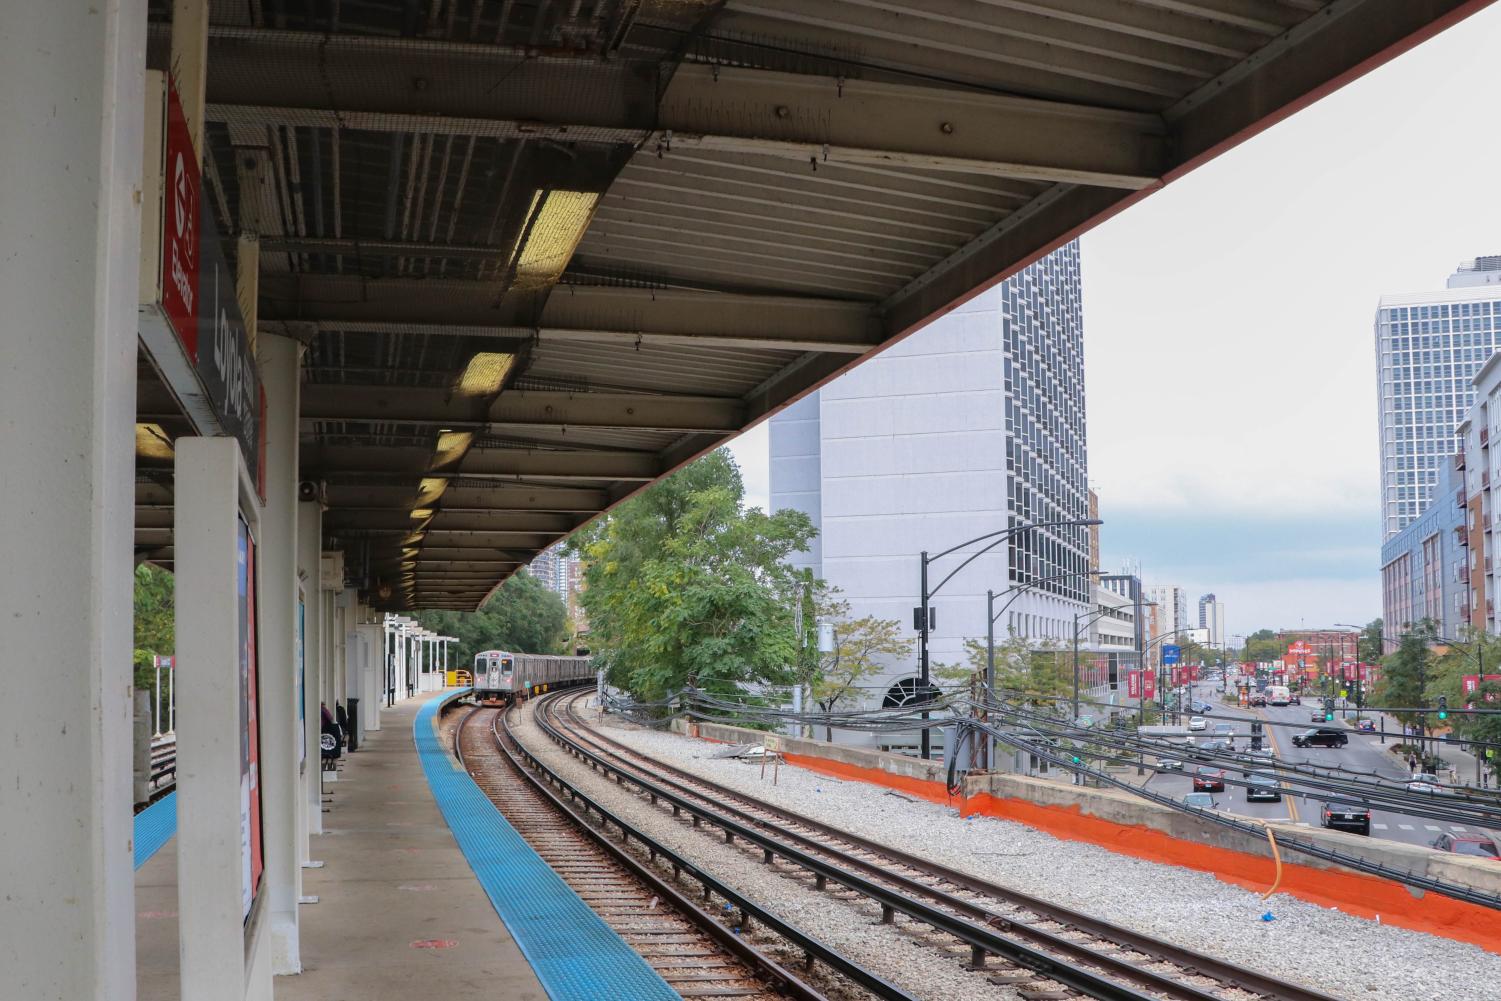 A+distant+train+rolls+into+the+Loyola+CTA+station.+City+buildings+are+visible+in+the+distance.